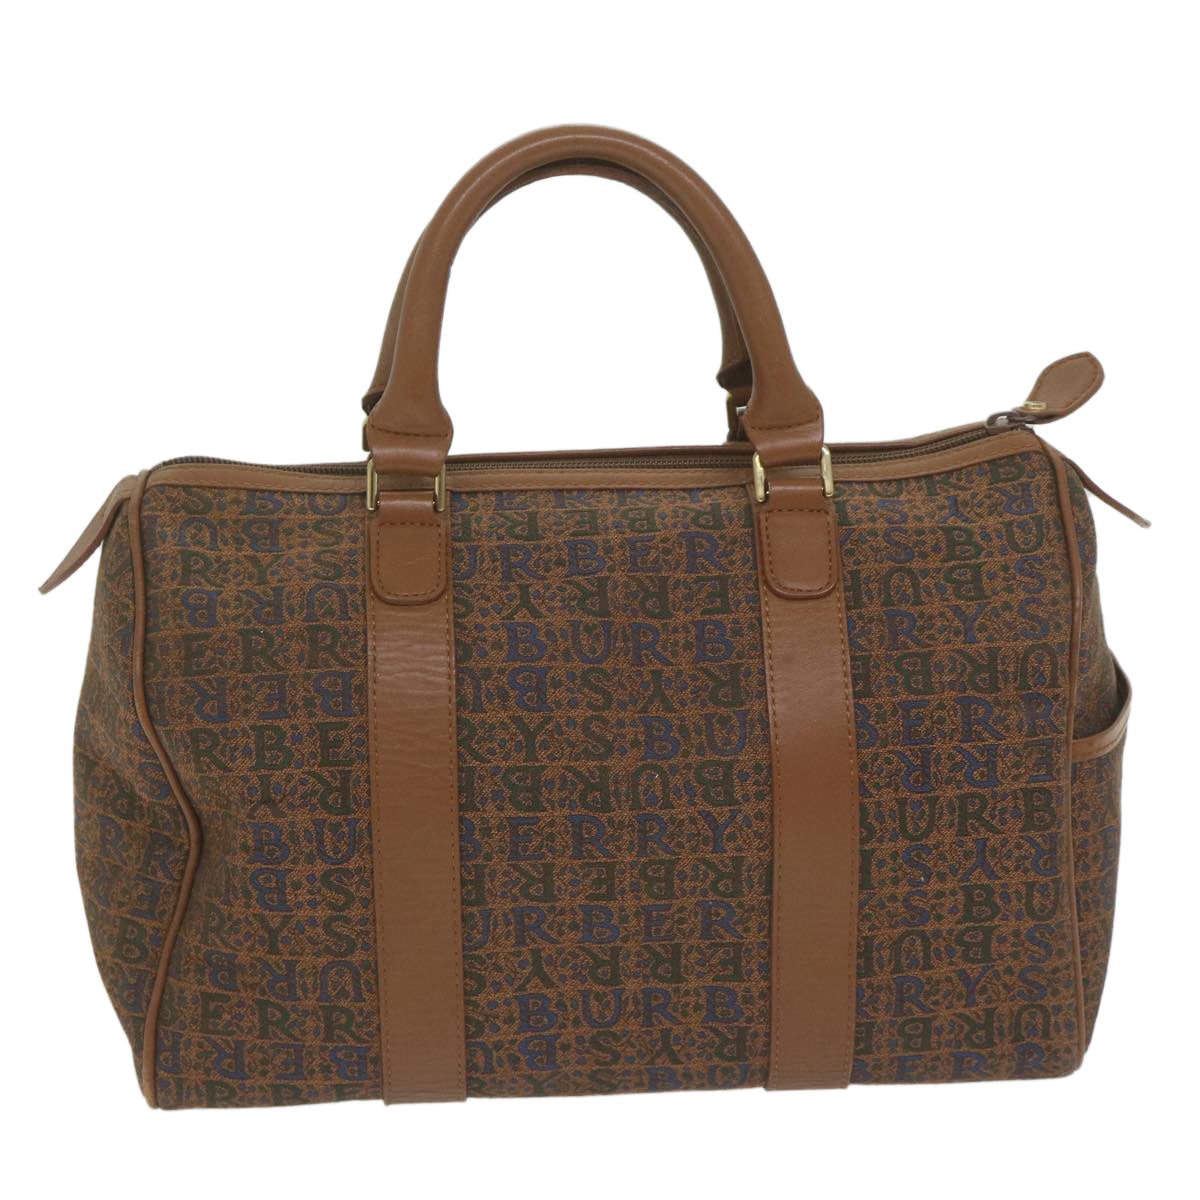 Burberrys Hand Bag Canvas Brown Auth bs10724 - 0